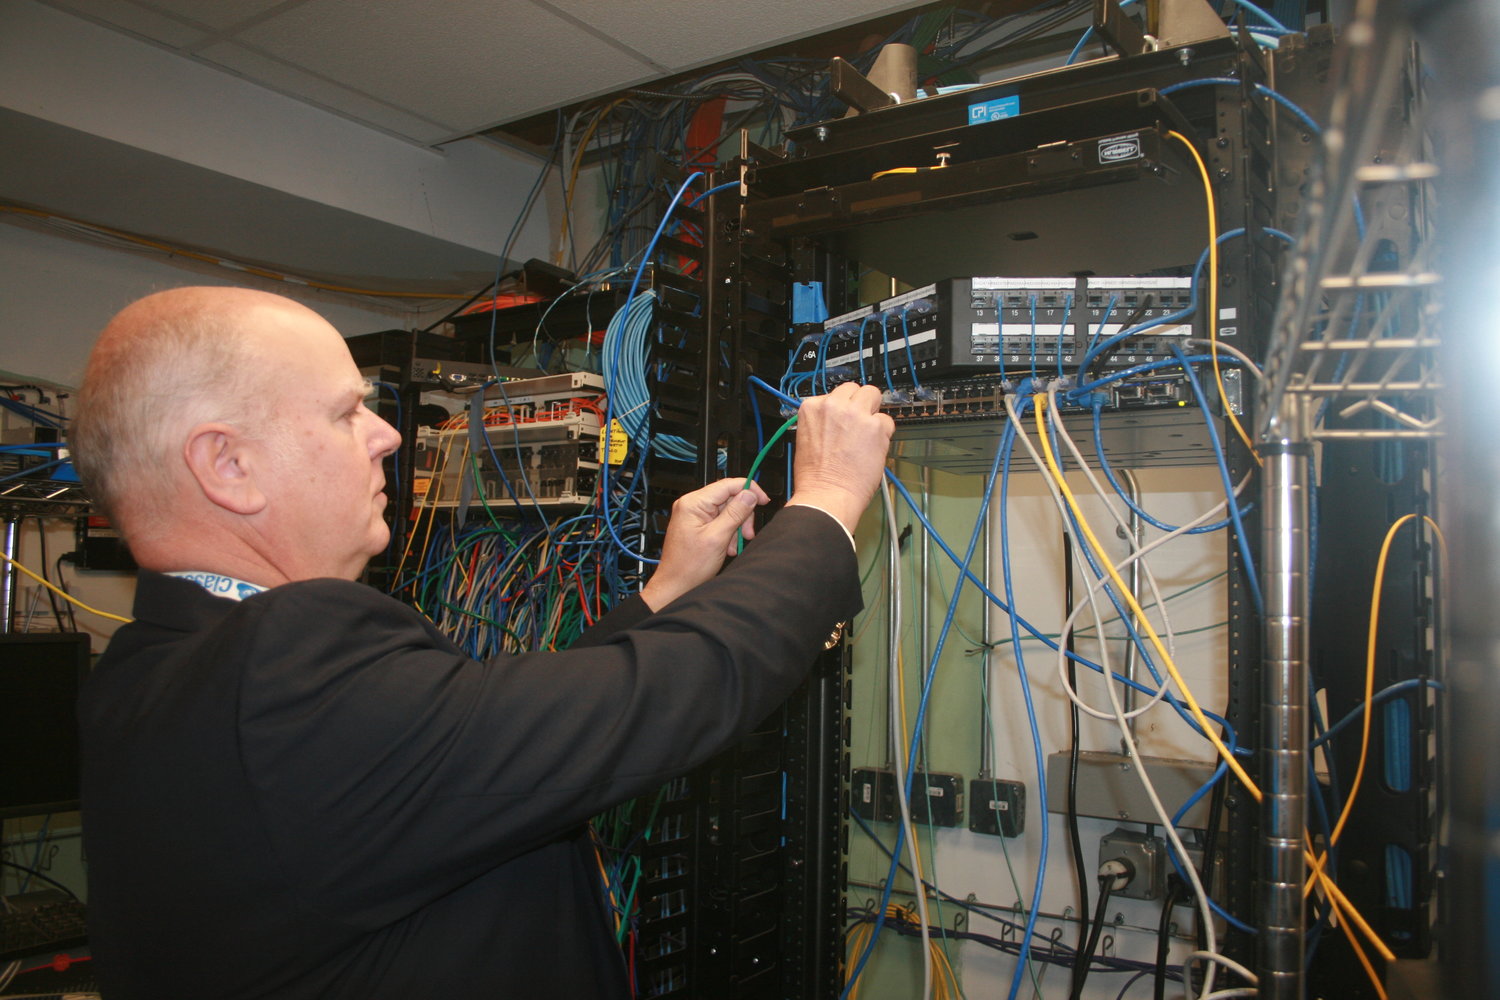 West Hempstead School District Director of Technology Vincent Fleck examines equipment at the middle school. Ensuring that the network is secure is a constant endeavor.